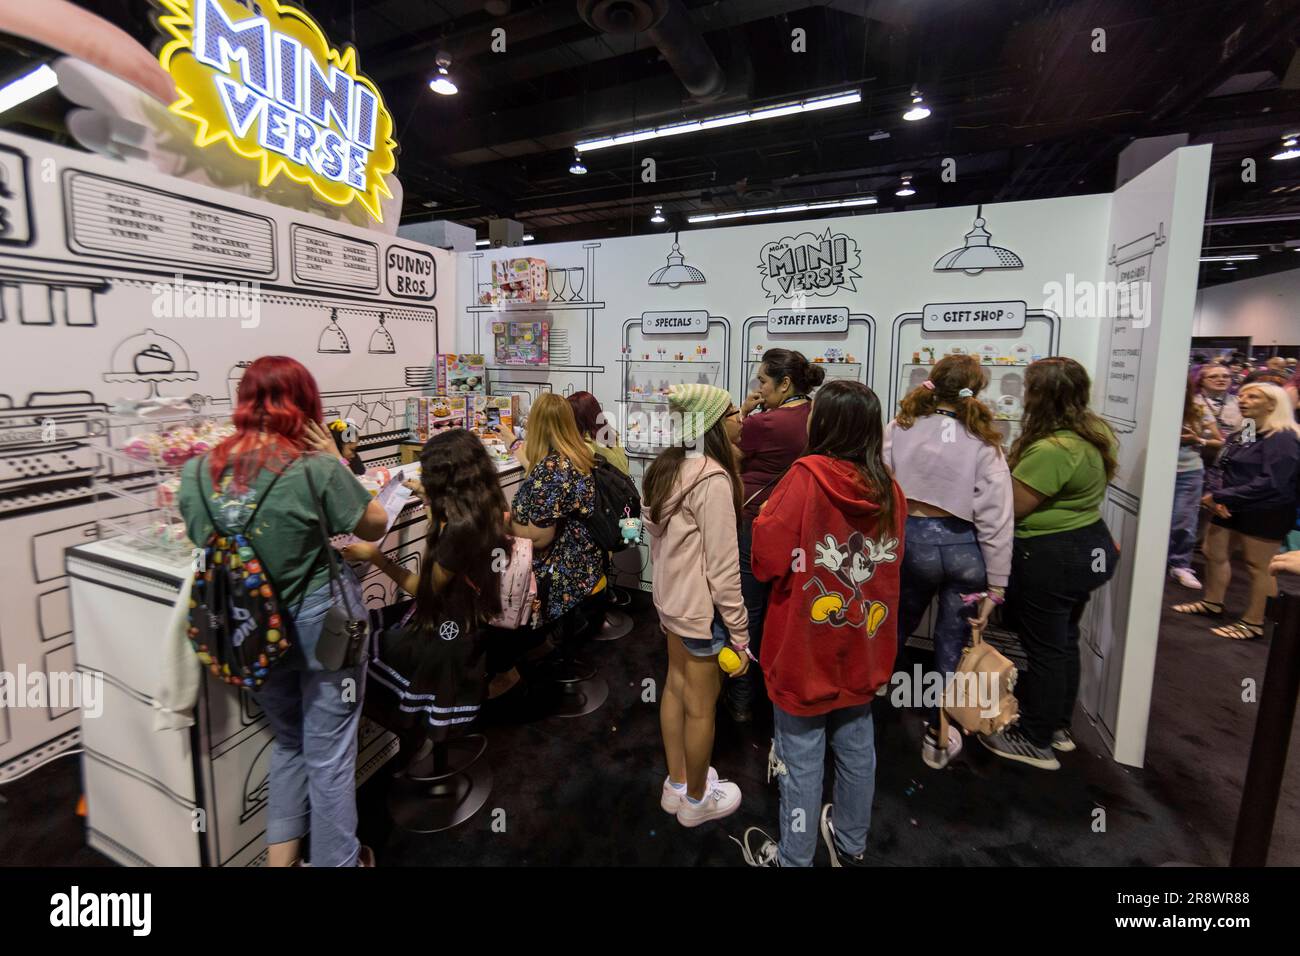 https://c8.alamy.com/comp/2R8WR88/image-distributed-for-credit-mga-entertainment-fans-line-up-to-see-all-new-surprises-from-mgas-miniverse!-make-it-mini-food-and-lifestyle-collectables-thursday-june-22-2023-in-anaheim-calif-jeff-lewisap-images-for-mga-entertainment-2R8WR88.jpg